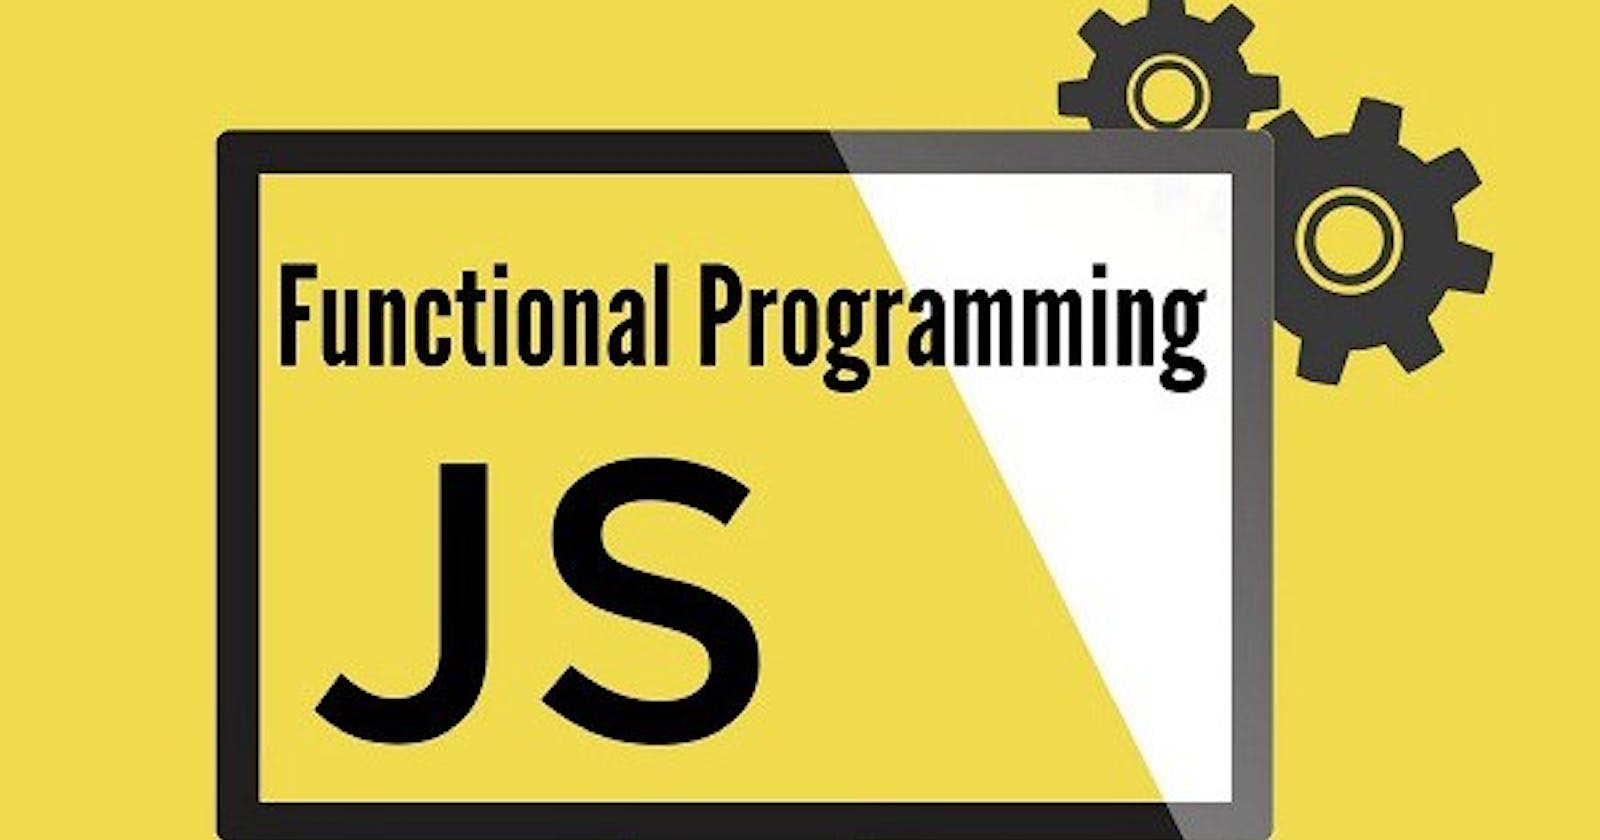 Functional Programming with JavaScript